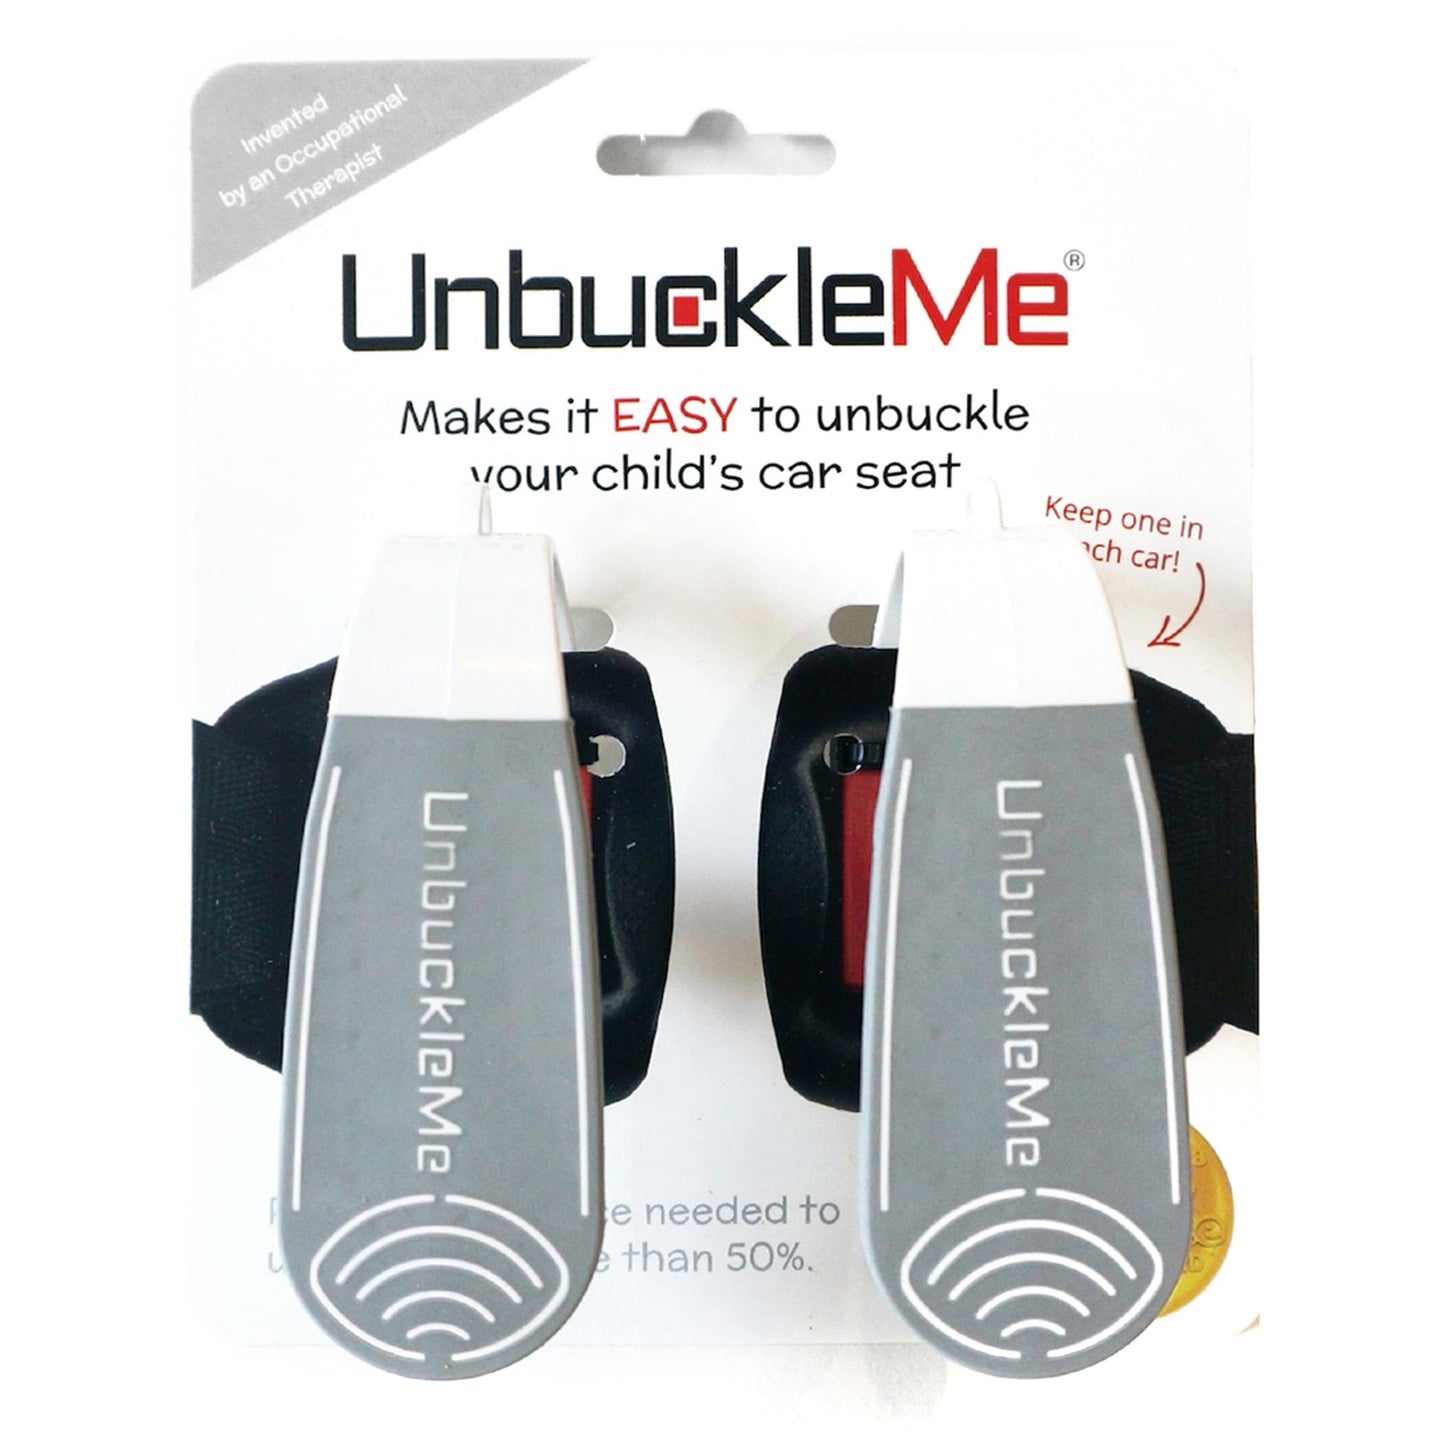 UNBUCKLEME CAR SEAT BUCKLE RELEASE TOOL - 2 PACK